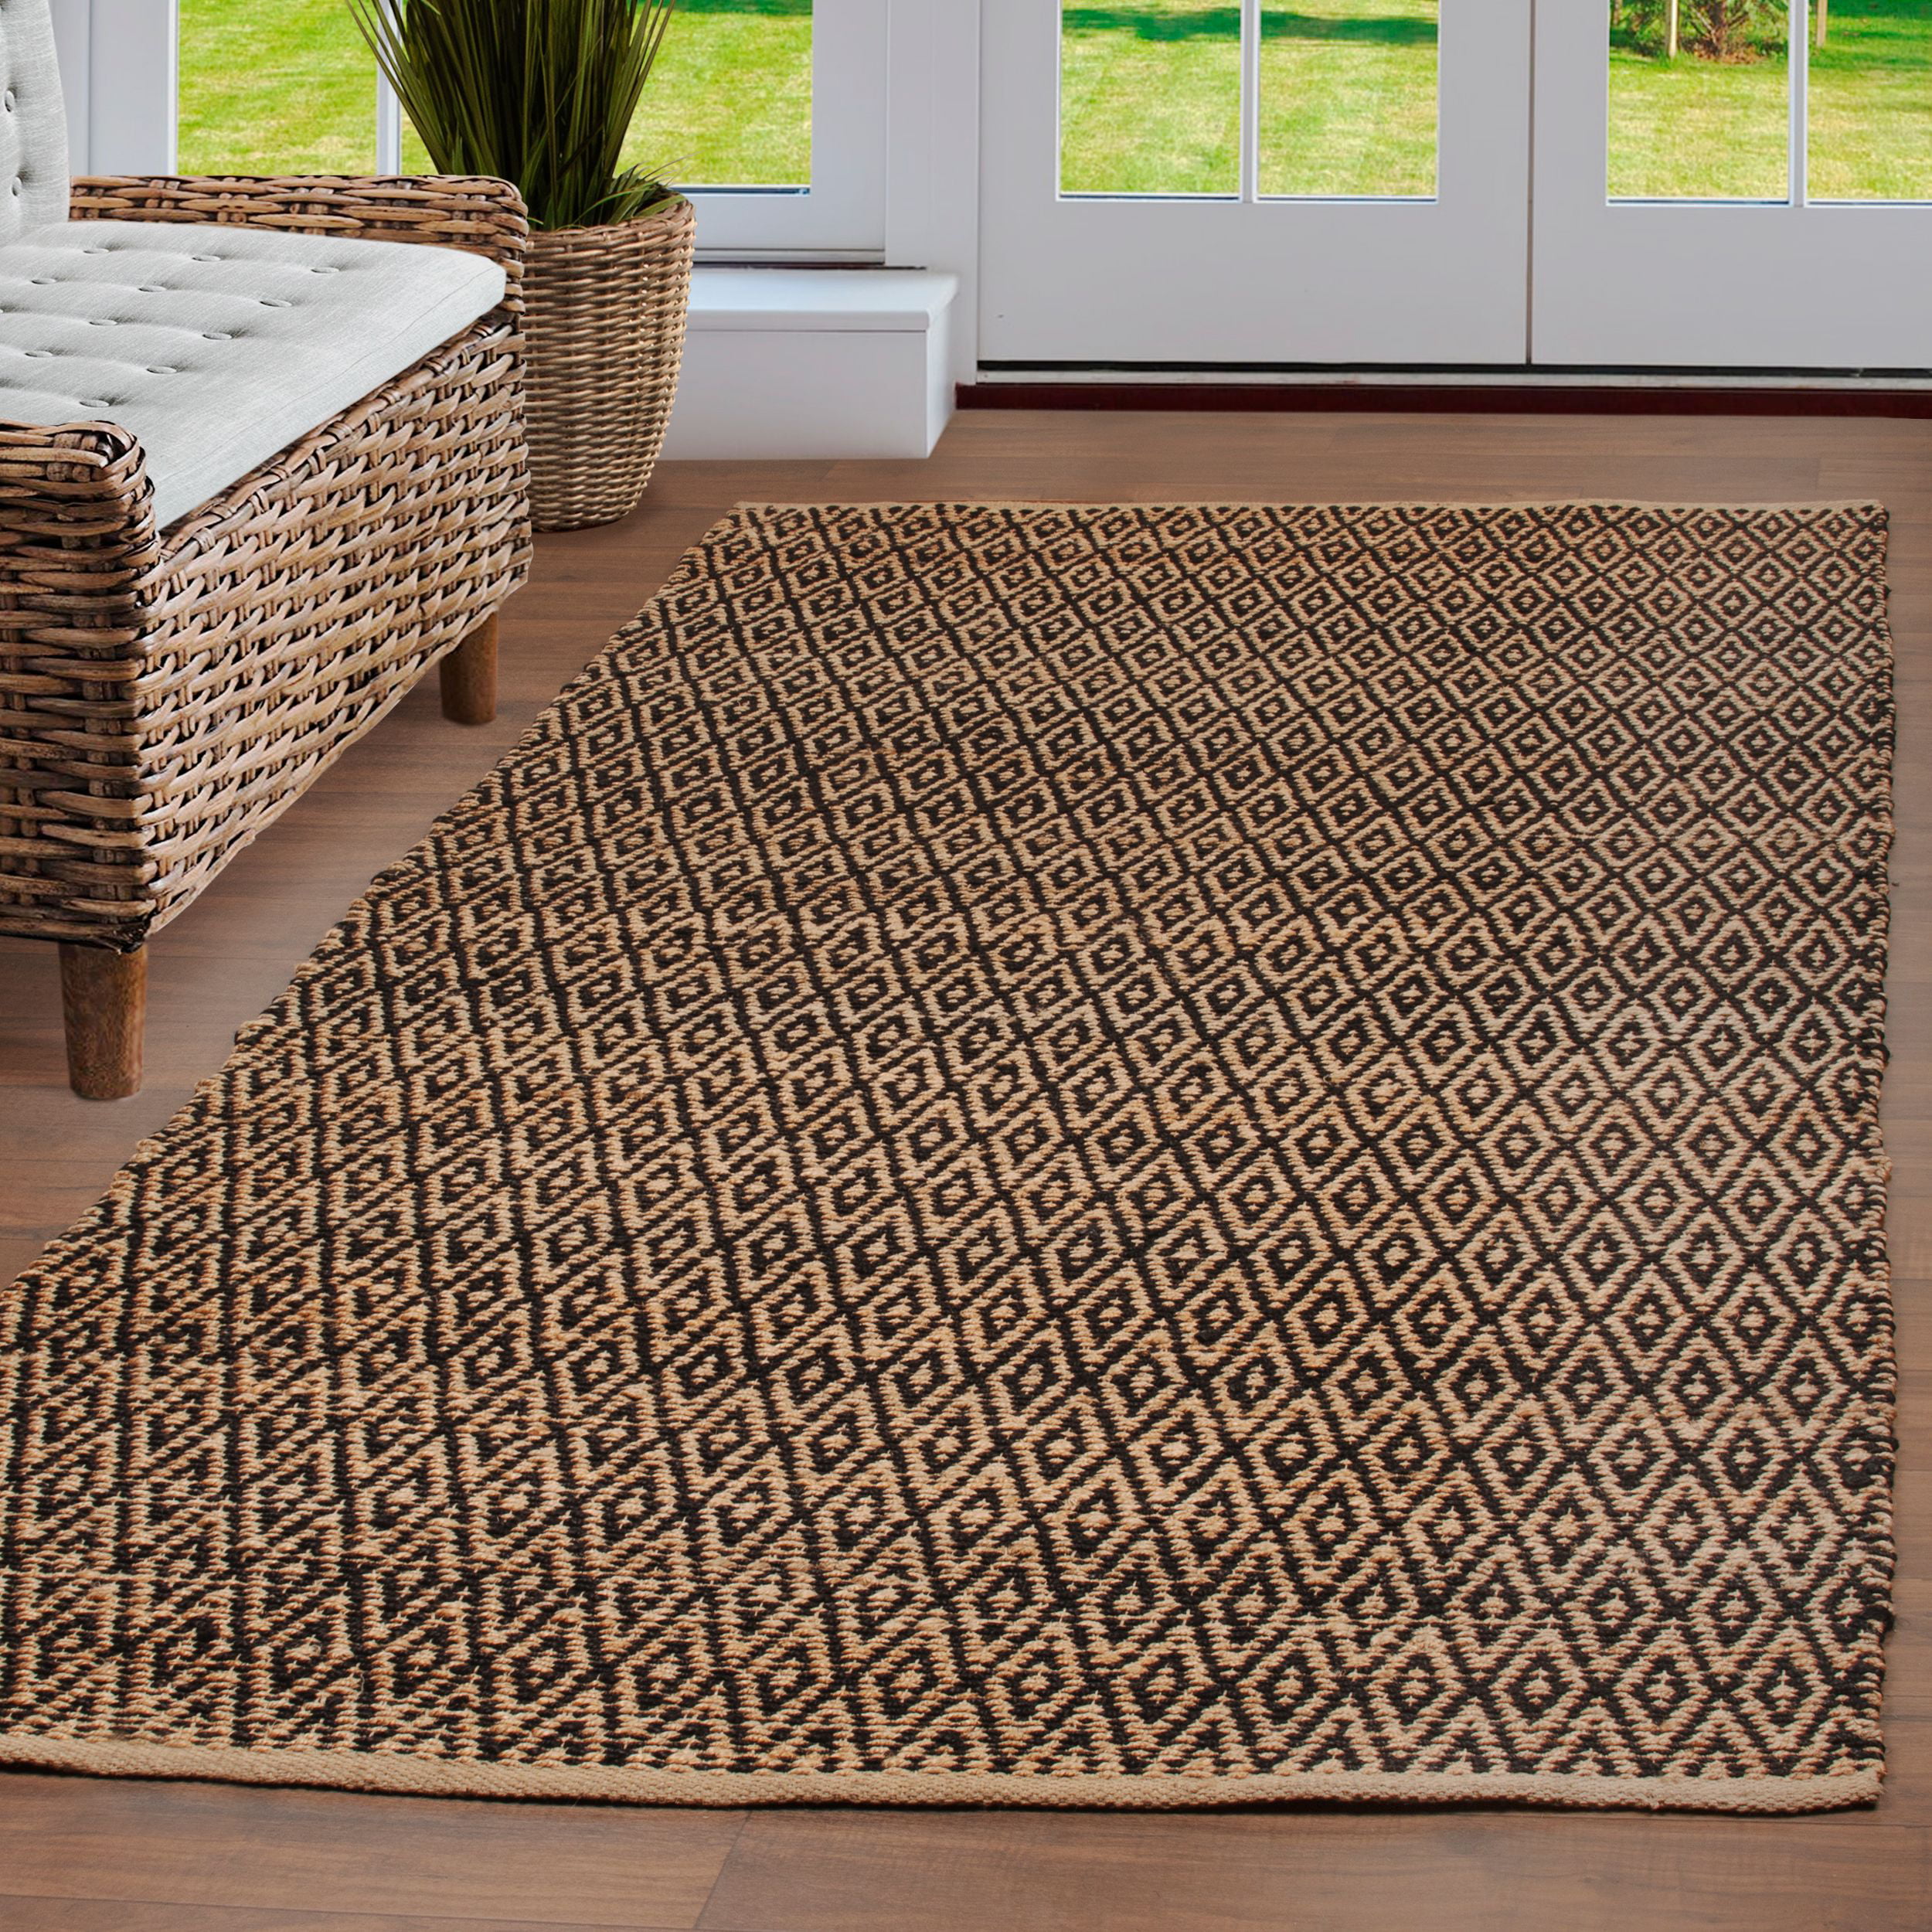 Superior Natural Diamond Collection Hand Woven Jute Rug - Black ...